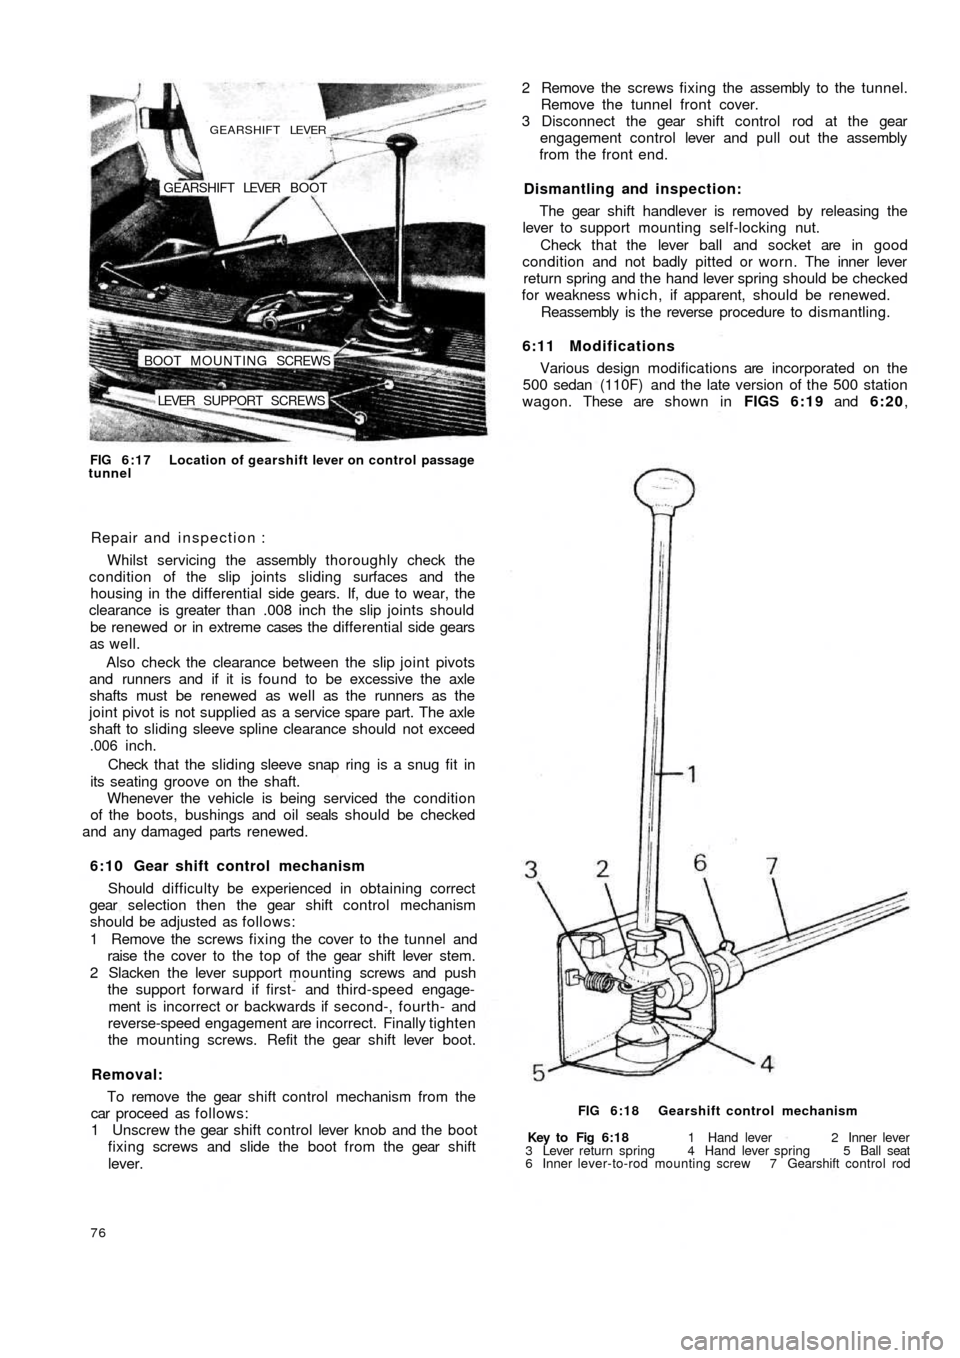 FIAT 500 1964 1.G Repair Manual LEVER  SUPPORT SCREWS BOOT MOUNTING SCREWSGEARSHIFT LEVER  BOOT
GEARSHIFT LEVER
FIG 6:17 Location of gearshift lever on control  passage
tunnel
Repair and inspection :
Whilst servicing the assembly th